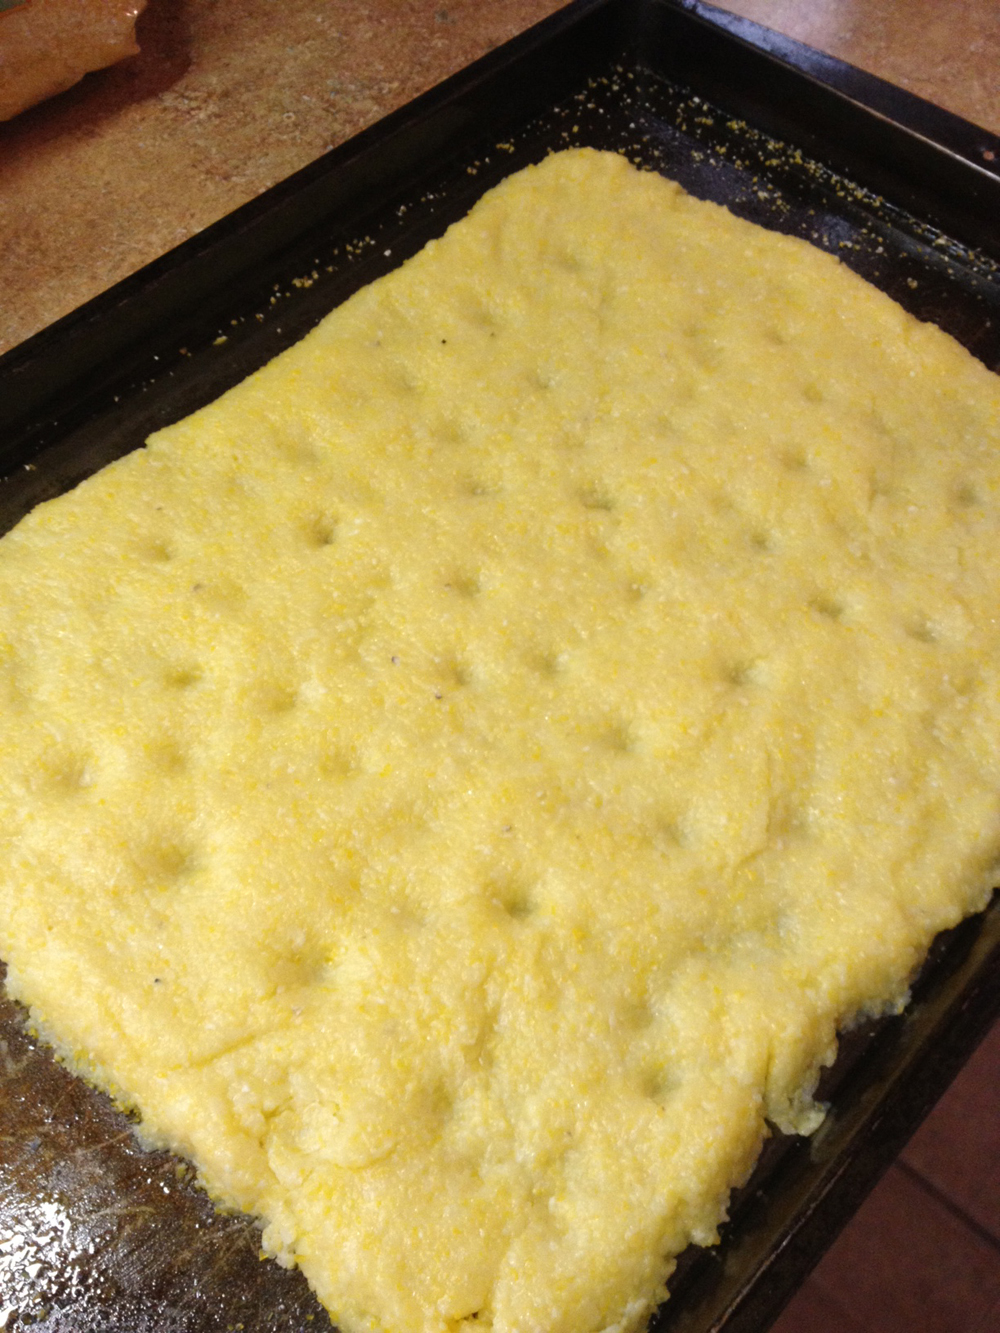 The polenta crust, shaped and ready to bake.